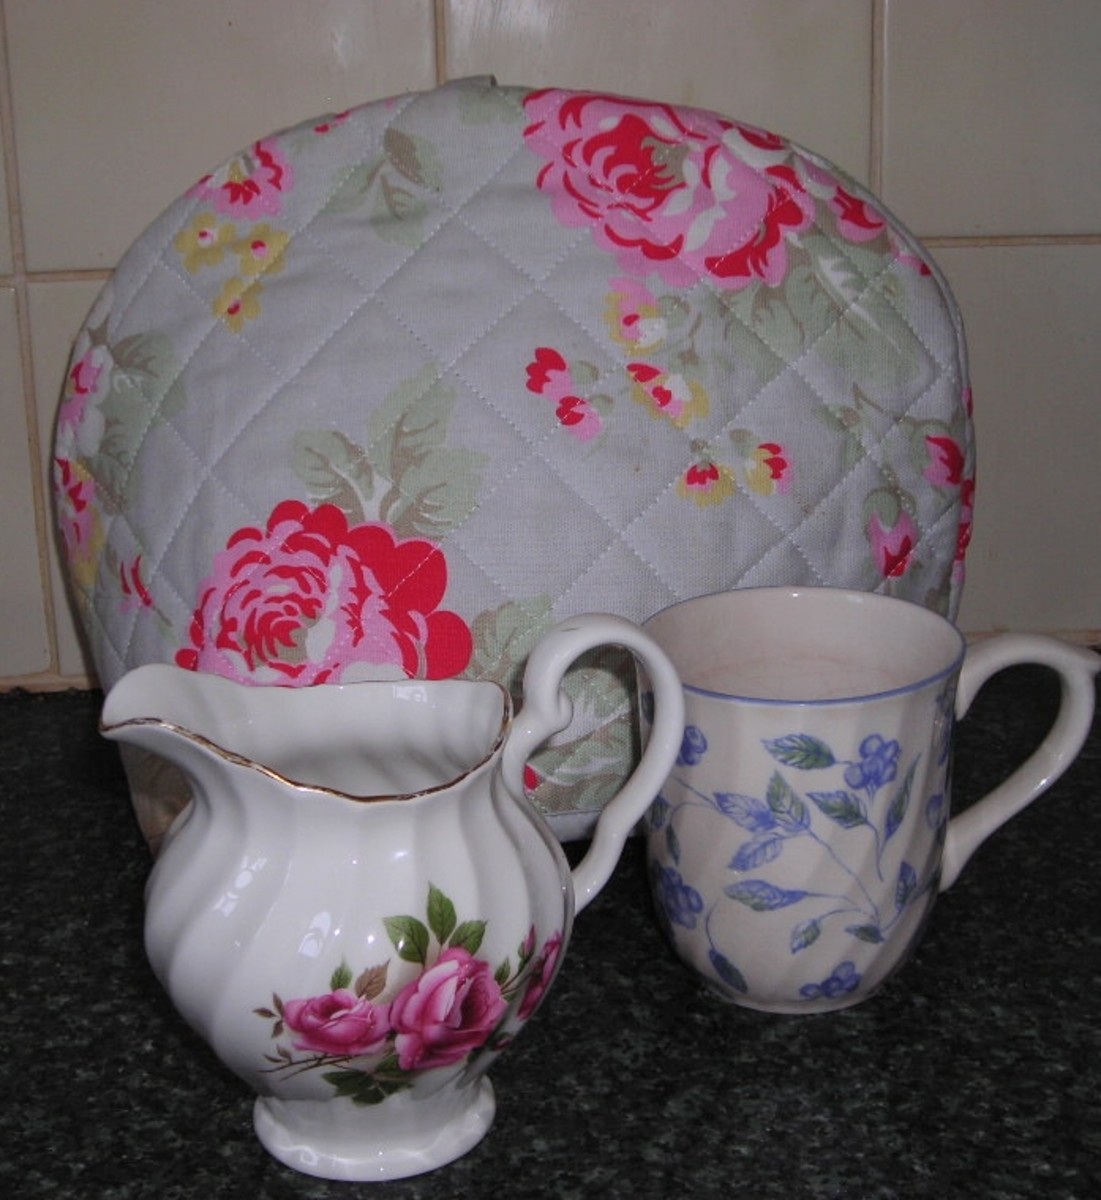 A Lovely Cup Of Tea - Poetry, Art And Bone China - Hubpages